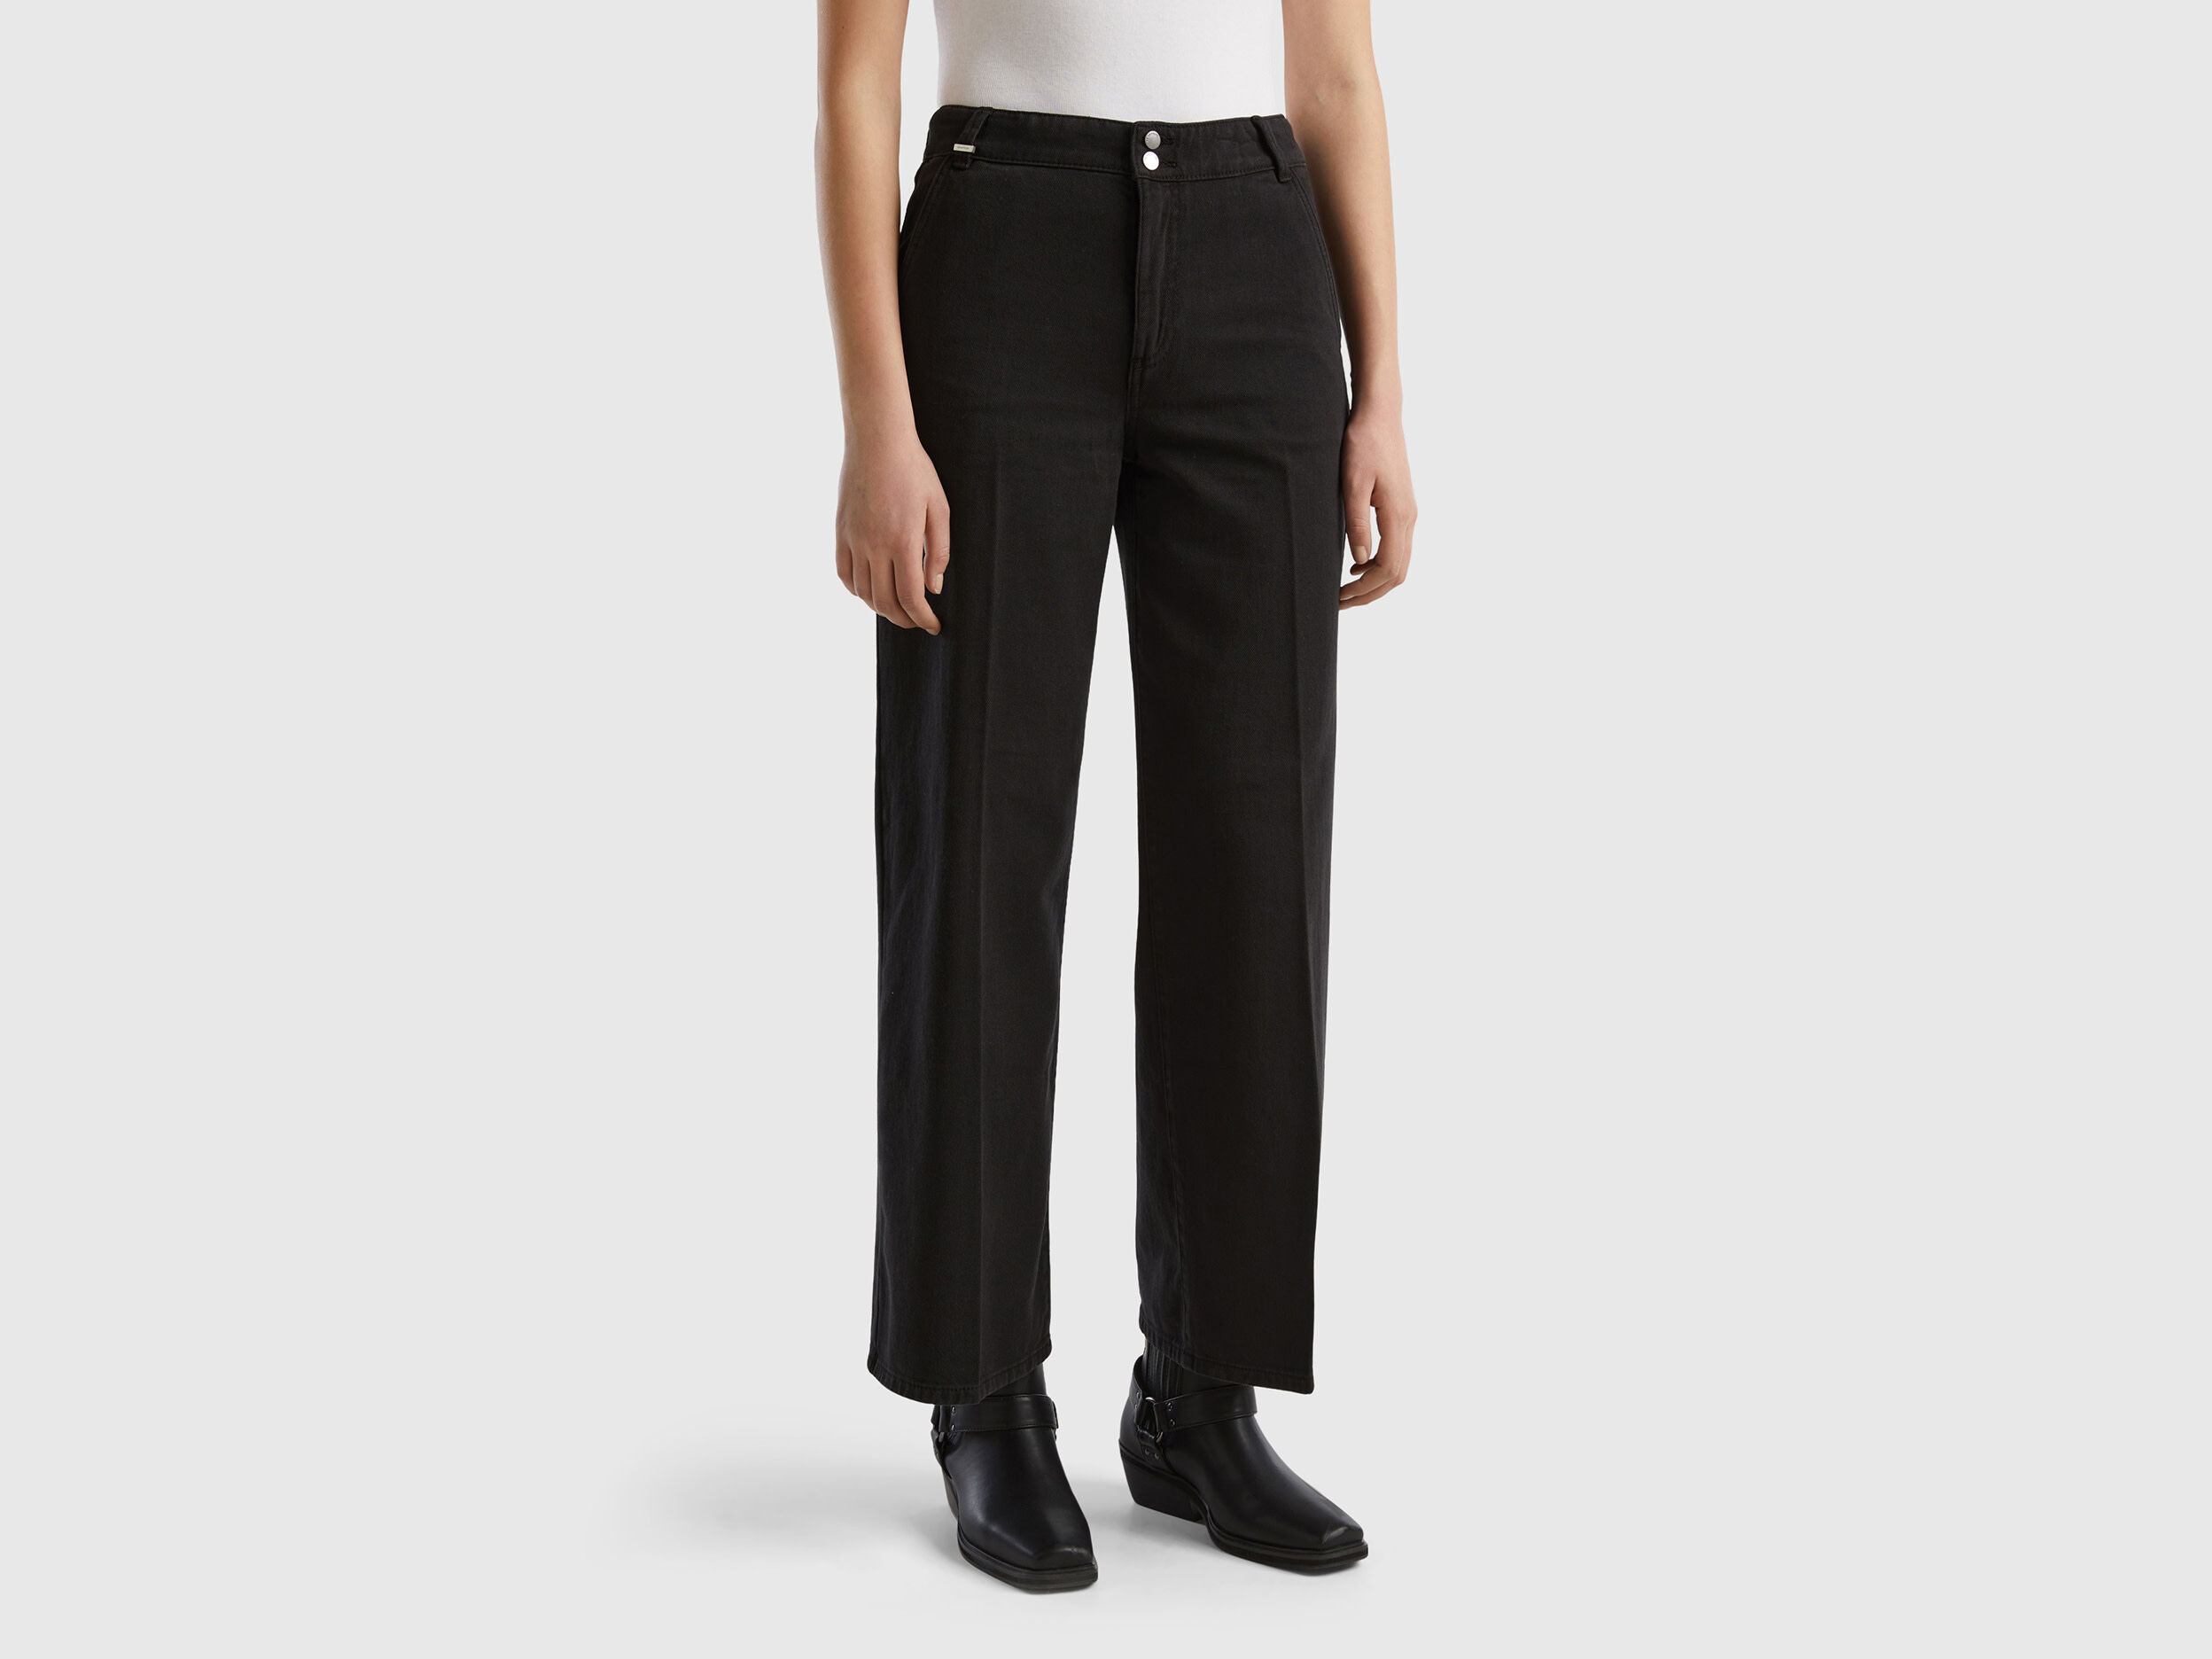 Buy UNITED COLORS OF BENETTON Solid Cotton Lycra Slim Fit Men's Casual  Trousers | Shoppers Stop